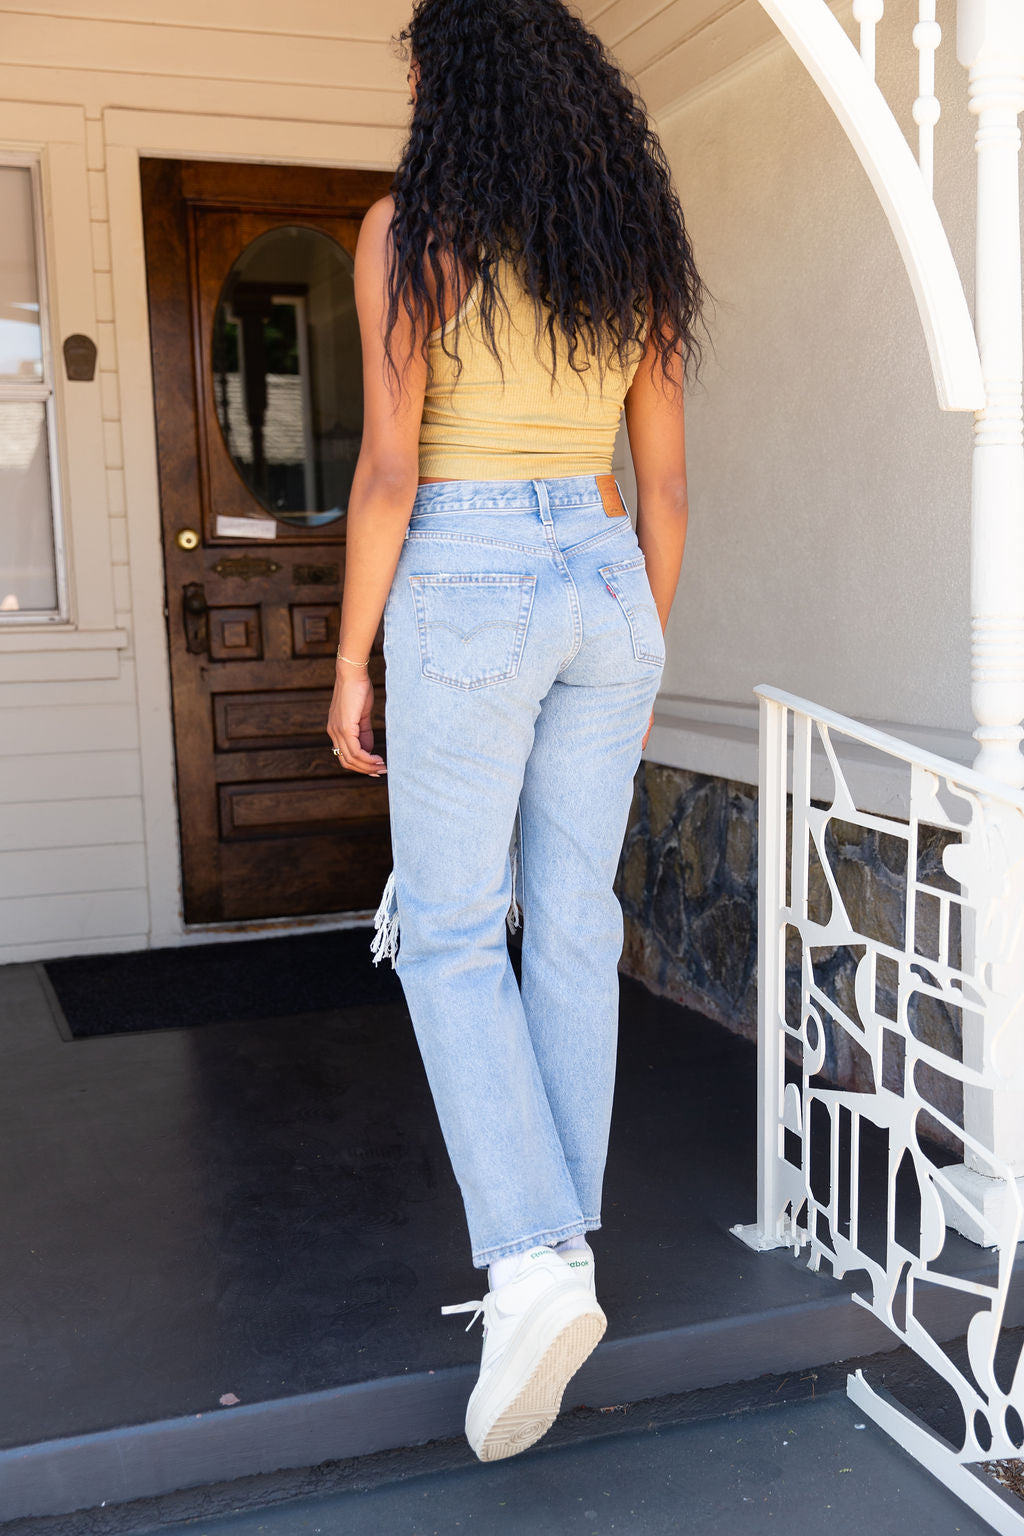 501 90's Totally Ok Jeans by Levi's